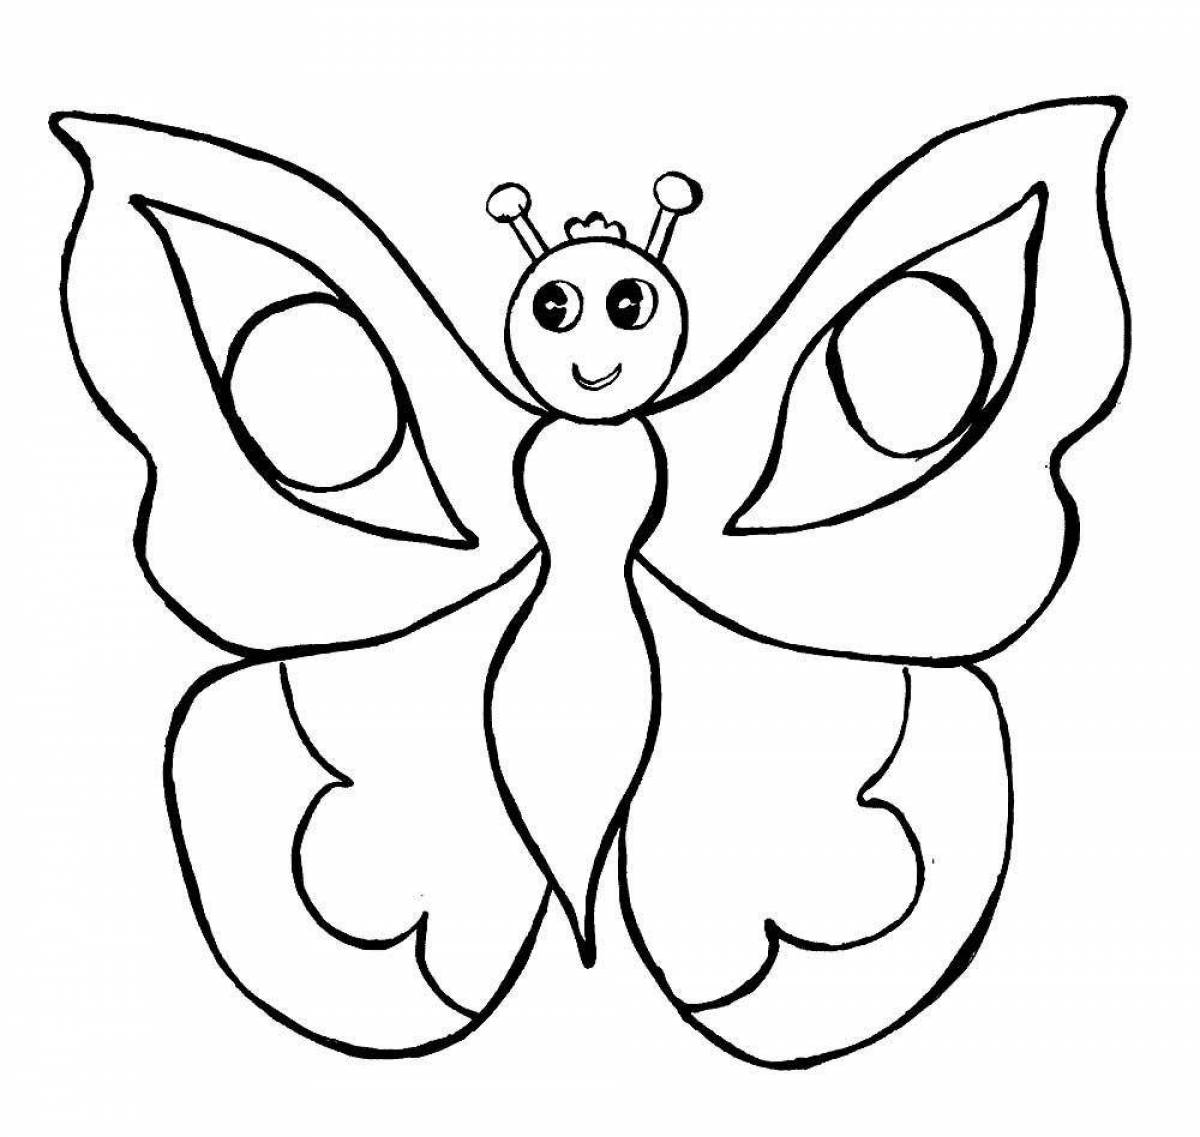 Exuberant butterfly drawing for kids